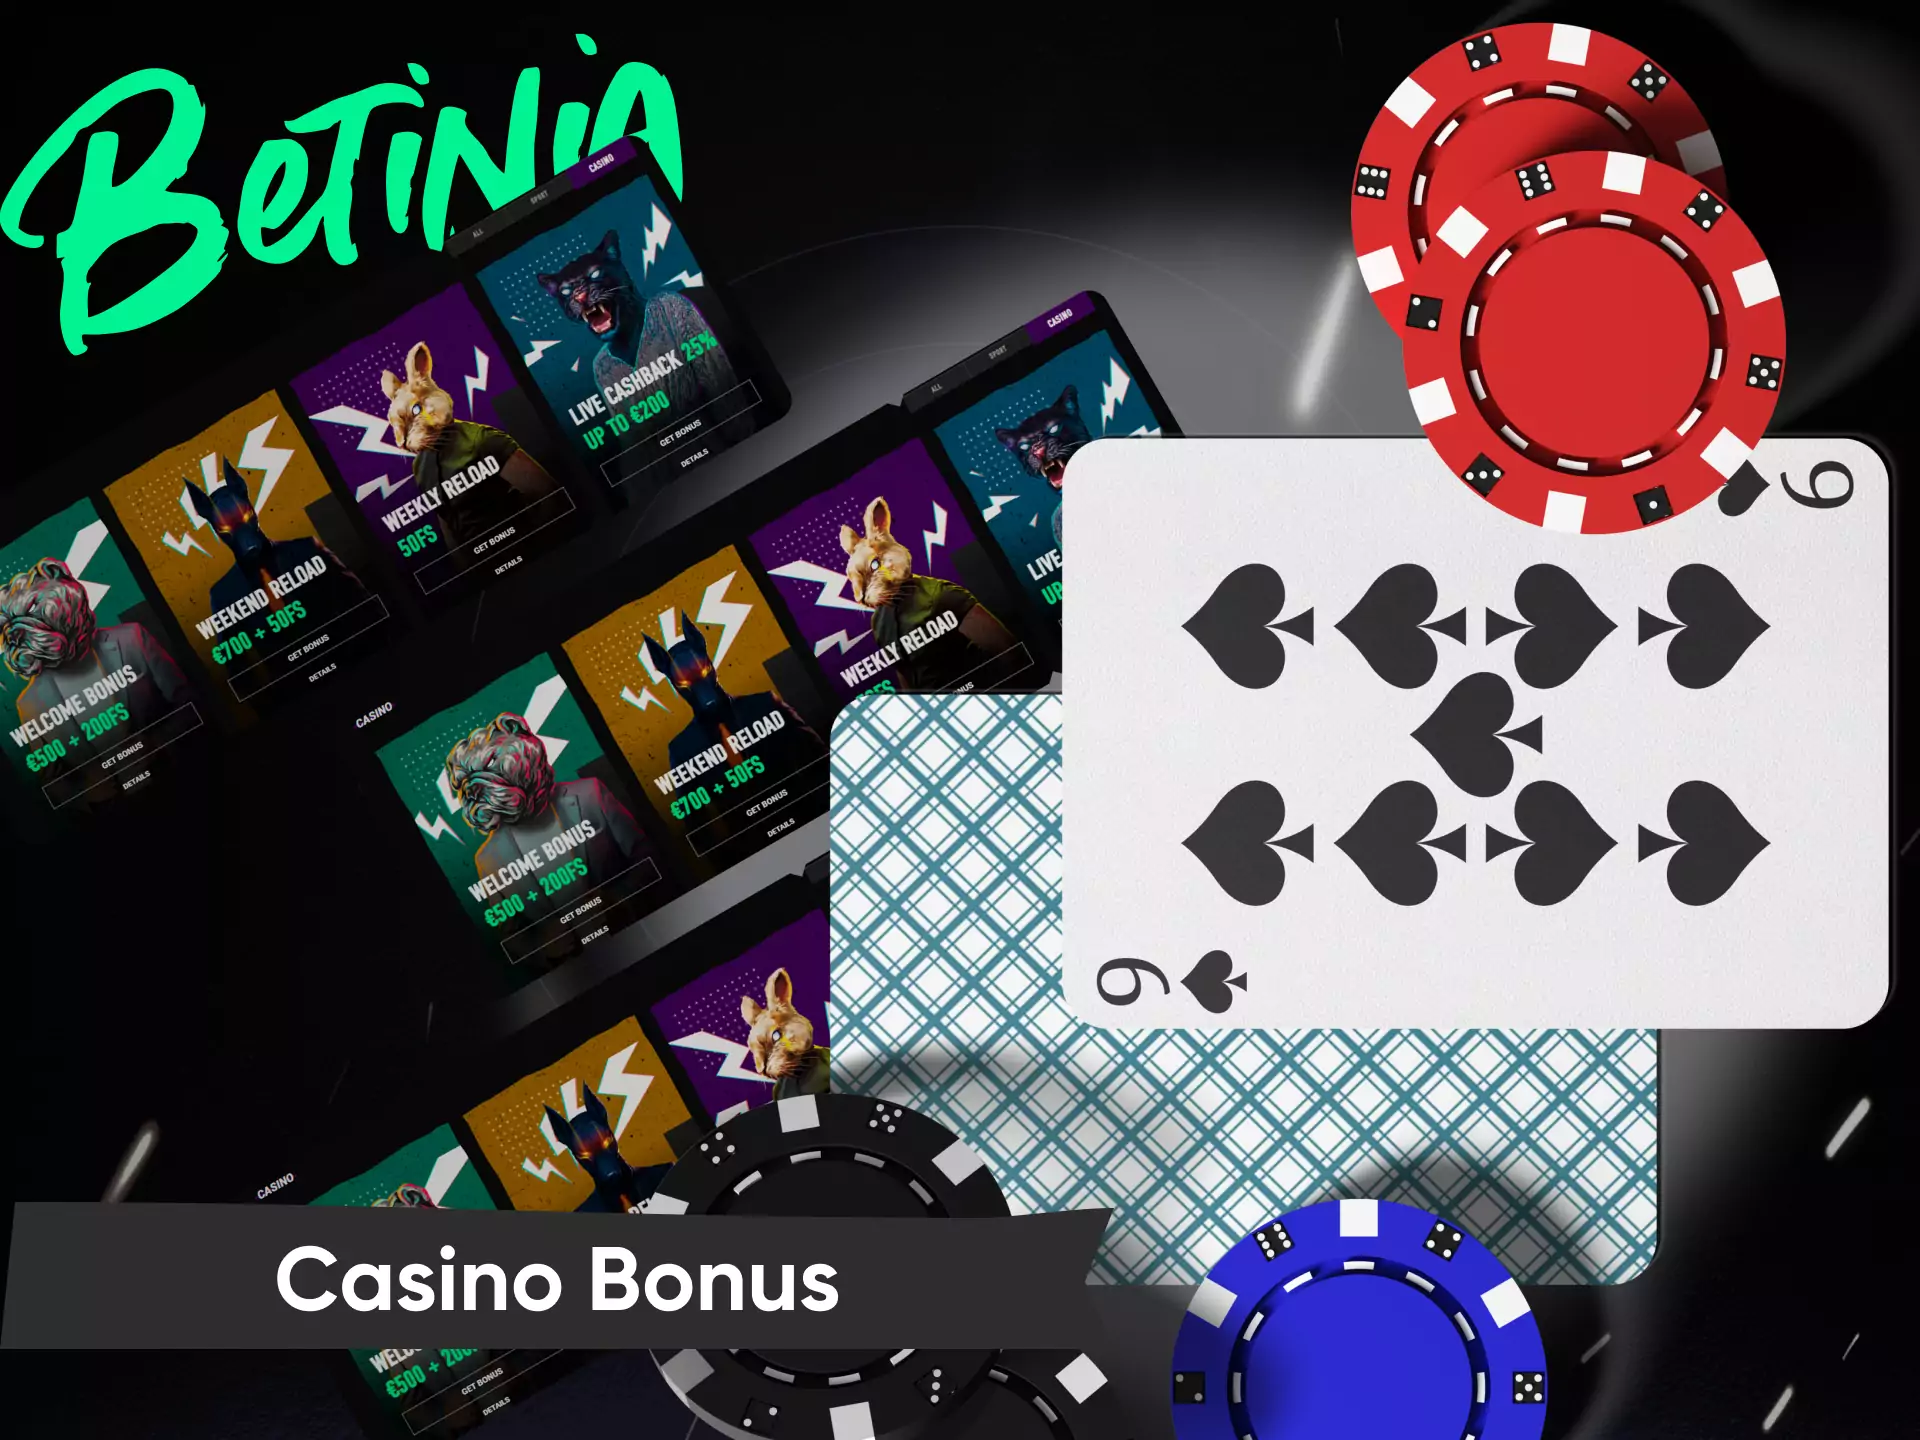 New users of Betinia get a welcome casino bonus from the bookmaker.